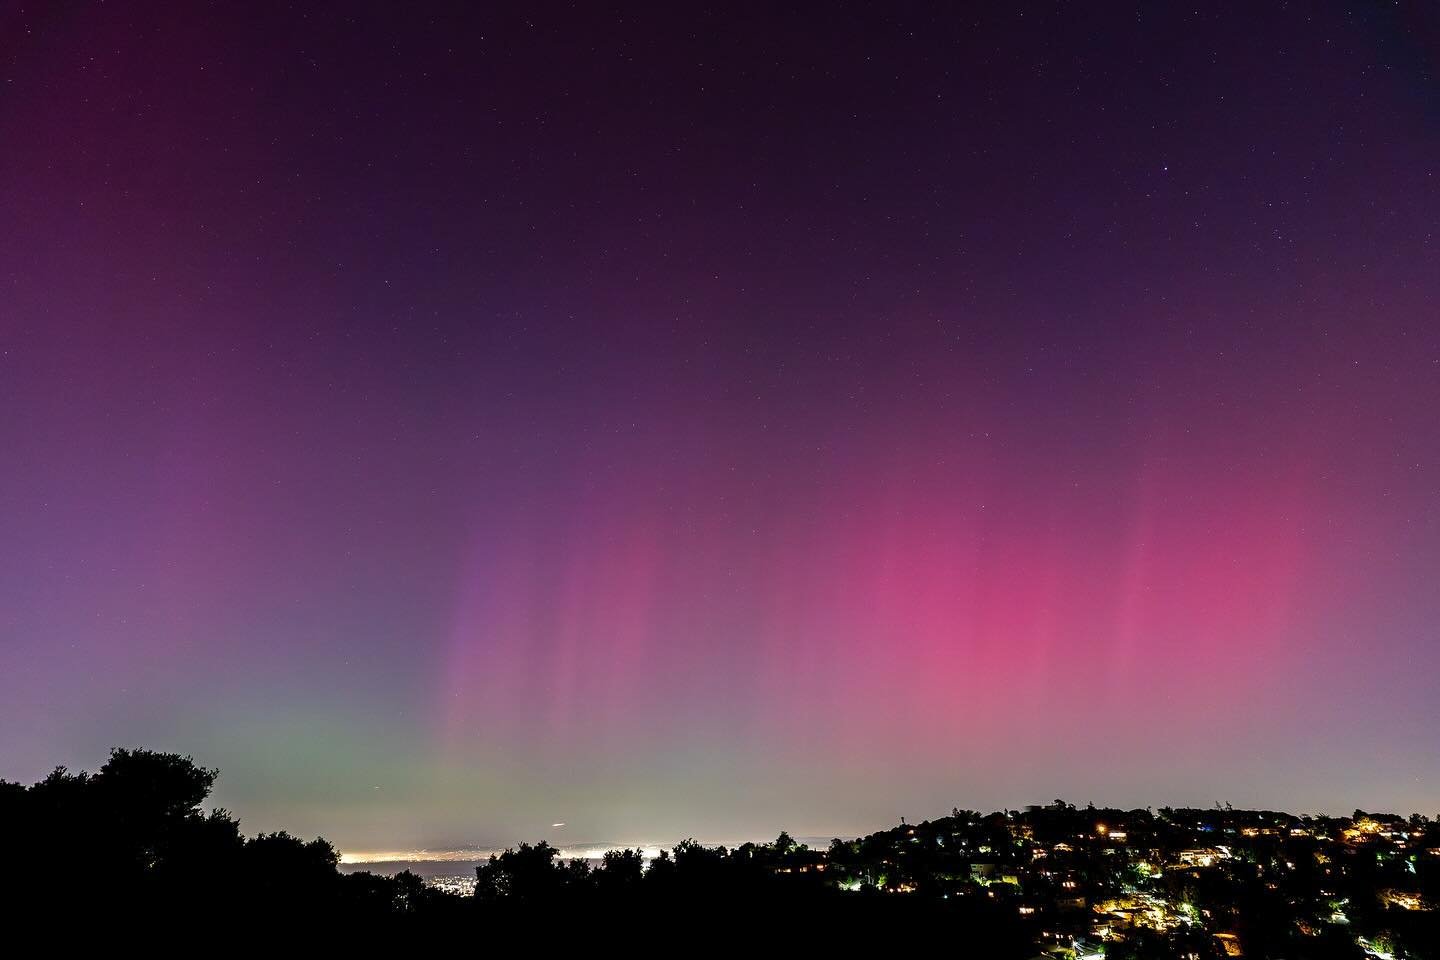 Aurora Borealis from Belmont, California.

Didn&rsquo;t really believe the reports that it would be visible, and I was at a Giants game on Friday night, blinded by stadium lights the majority of the evening. 

Once I got home, I could tell the night 